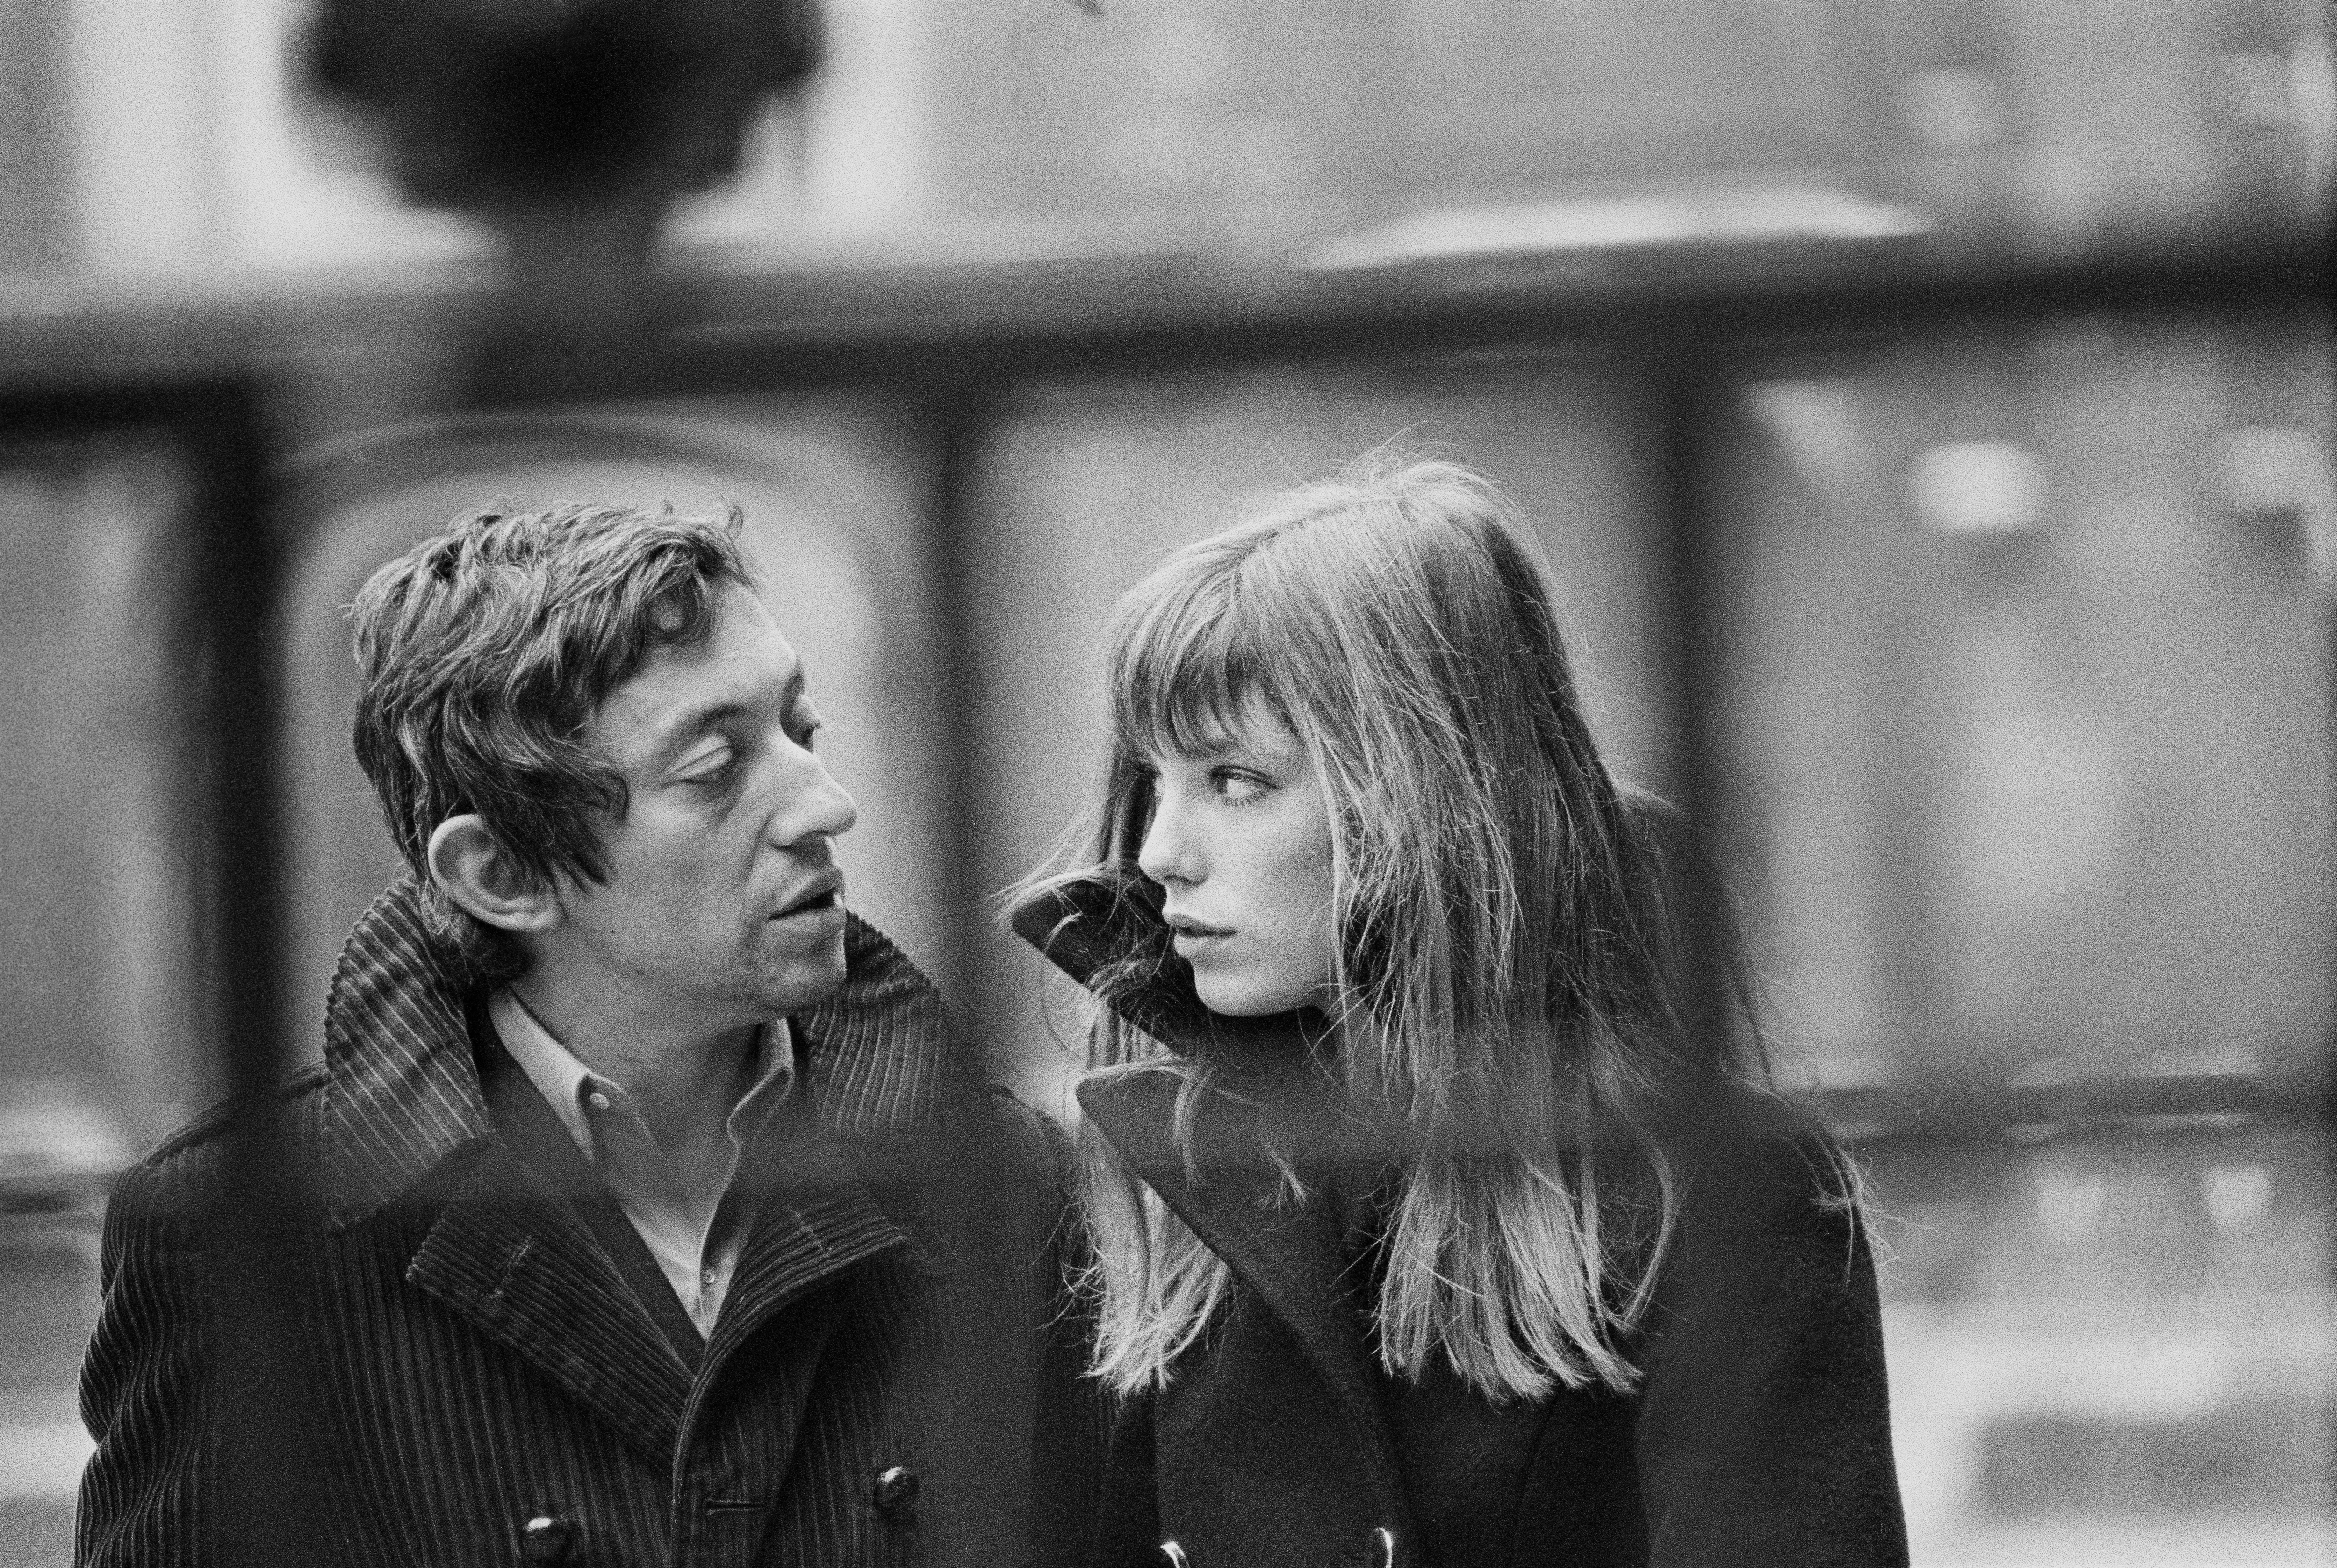 Serge-Gainsbourg-Jane-Birkin-_-Getty-Images-Jacques-Haillot